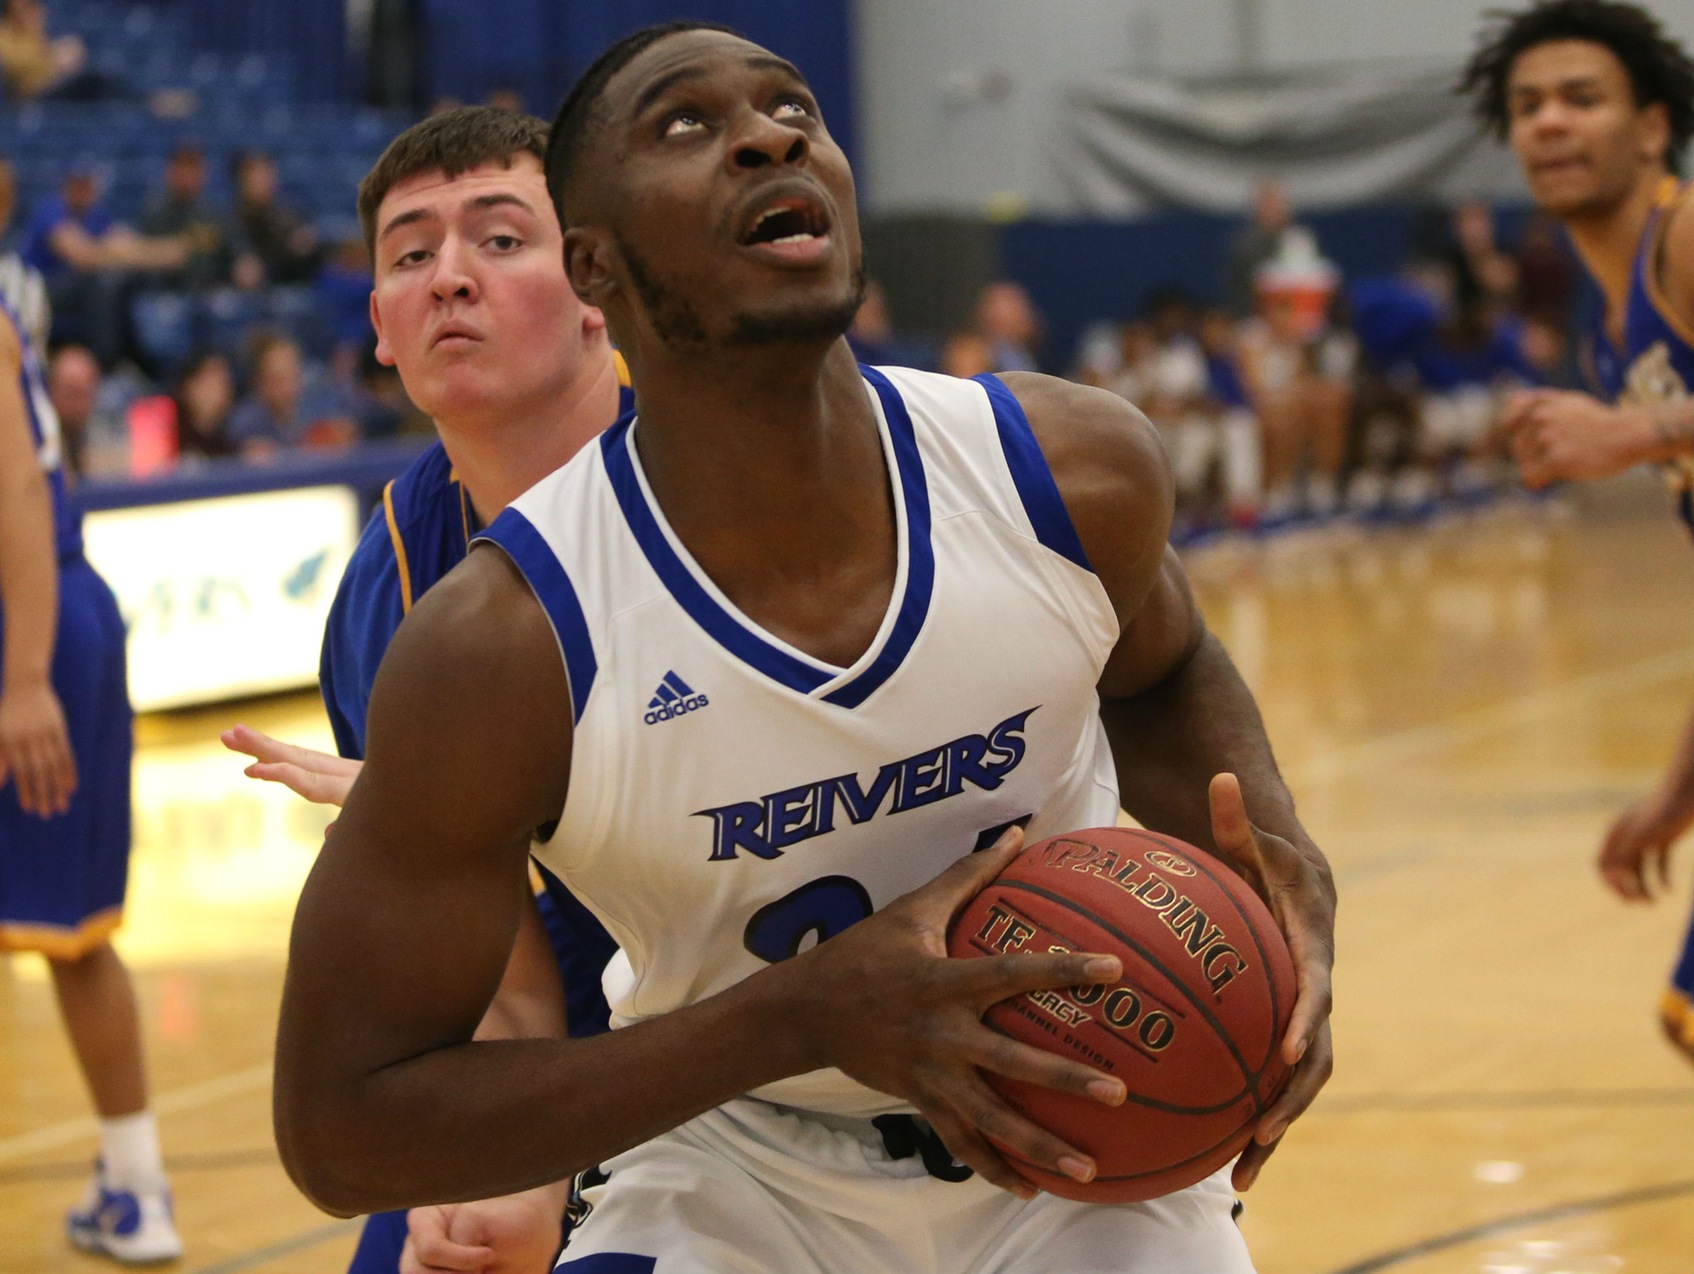 Emmanuel Ugboh was one of 13 Reivers on the men's basketball team to be honored at half-time for their Academic All-Region performances this year.